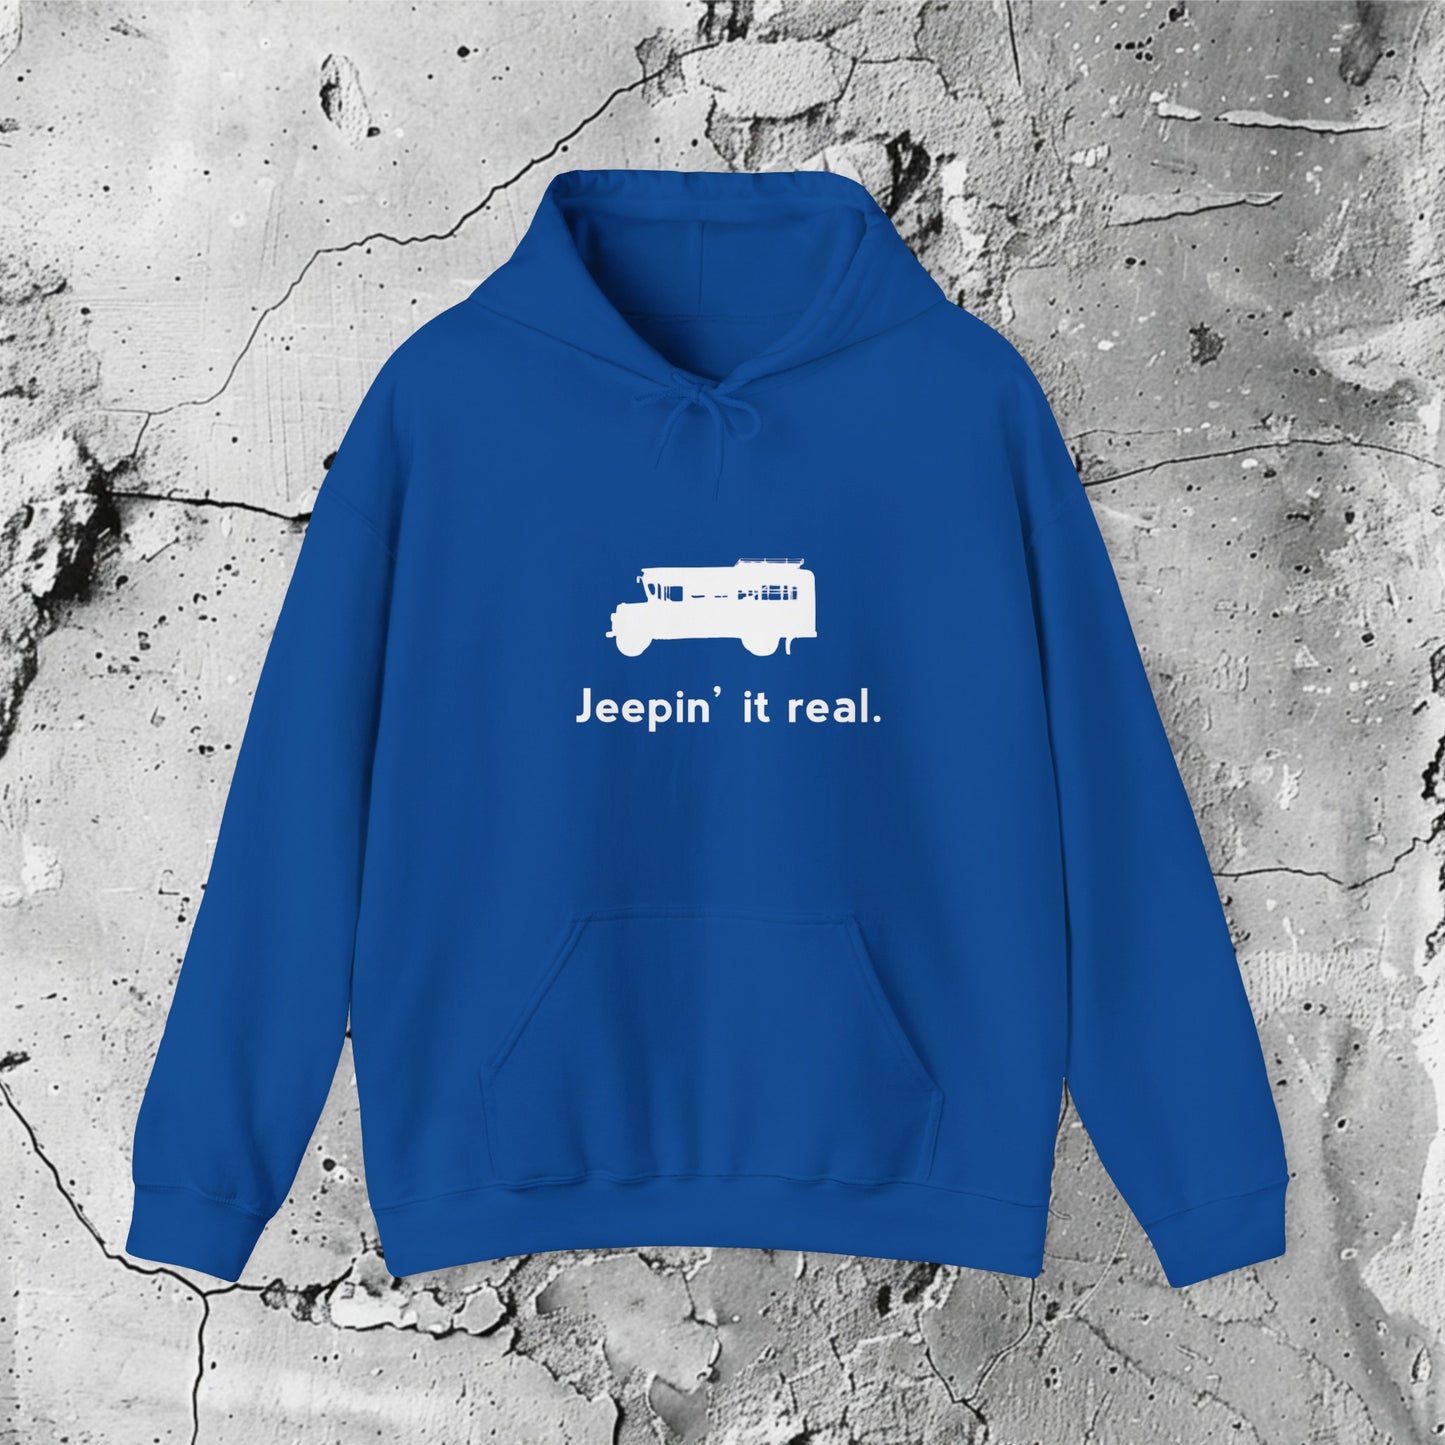 Jeepin' It Real White Graphic Hooded Sweatshirt